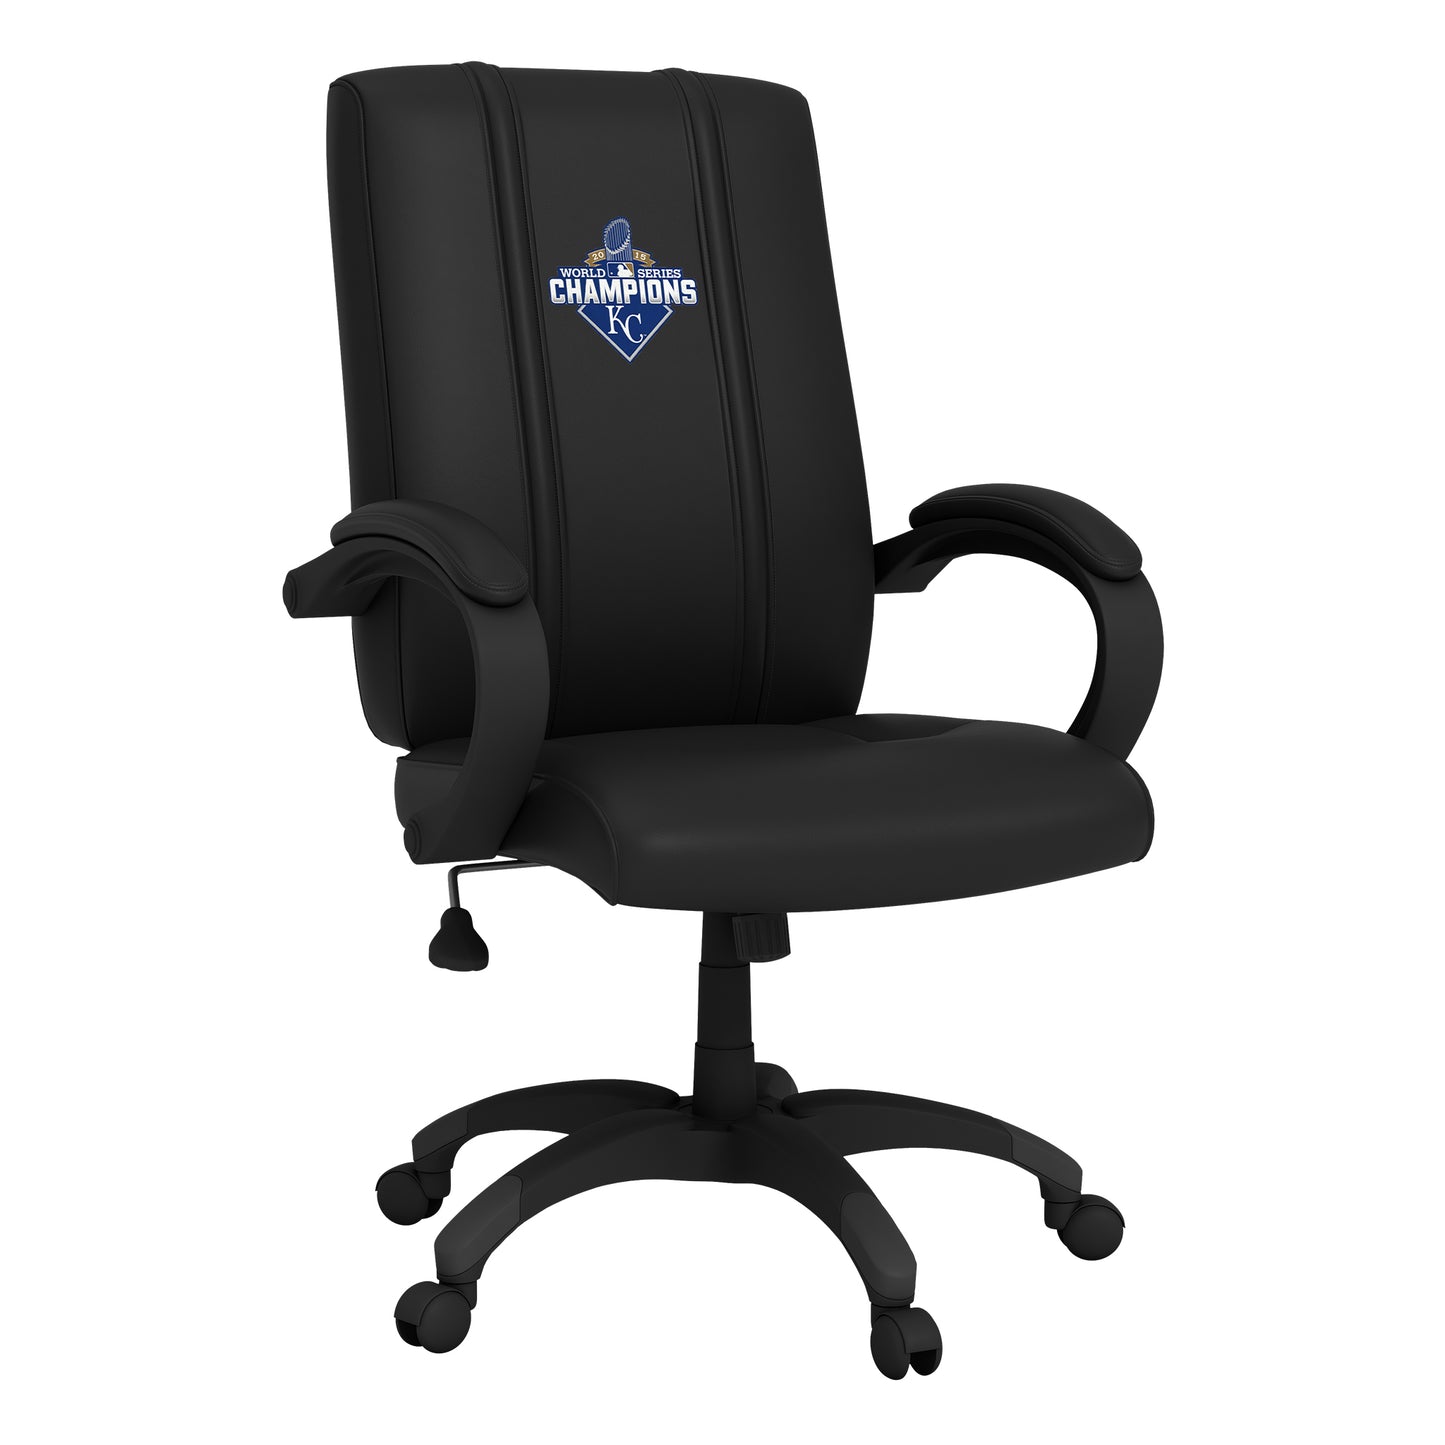 Office Chair 1000 with Kansas City Royals 2015 Champions